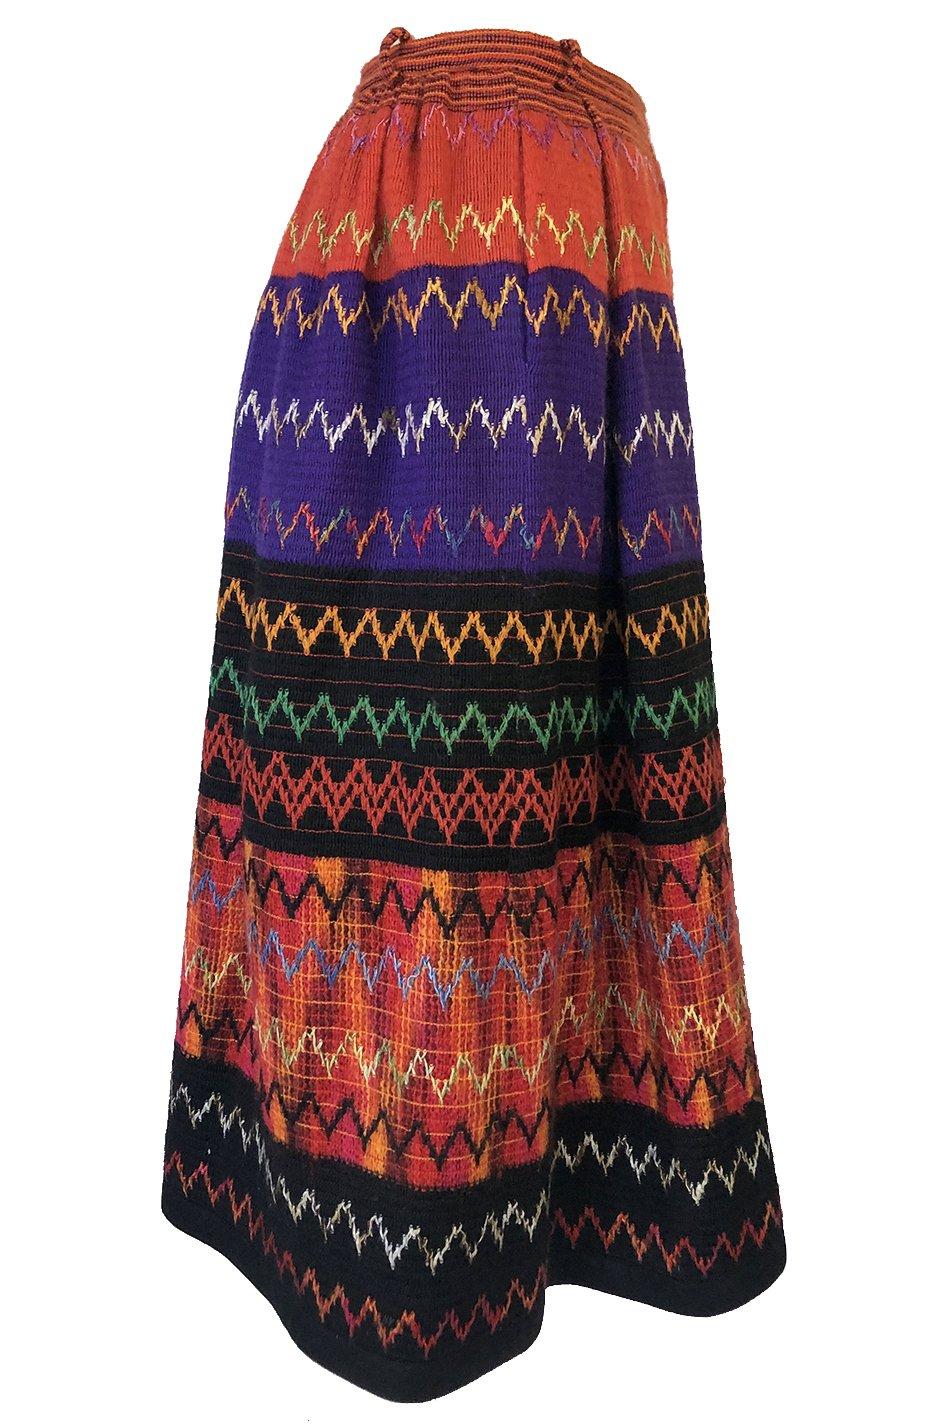 Black 1970s Lanvin Numbered Haute Couture Hand Woven Knit Embroidery Skirt